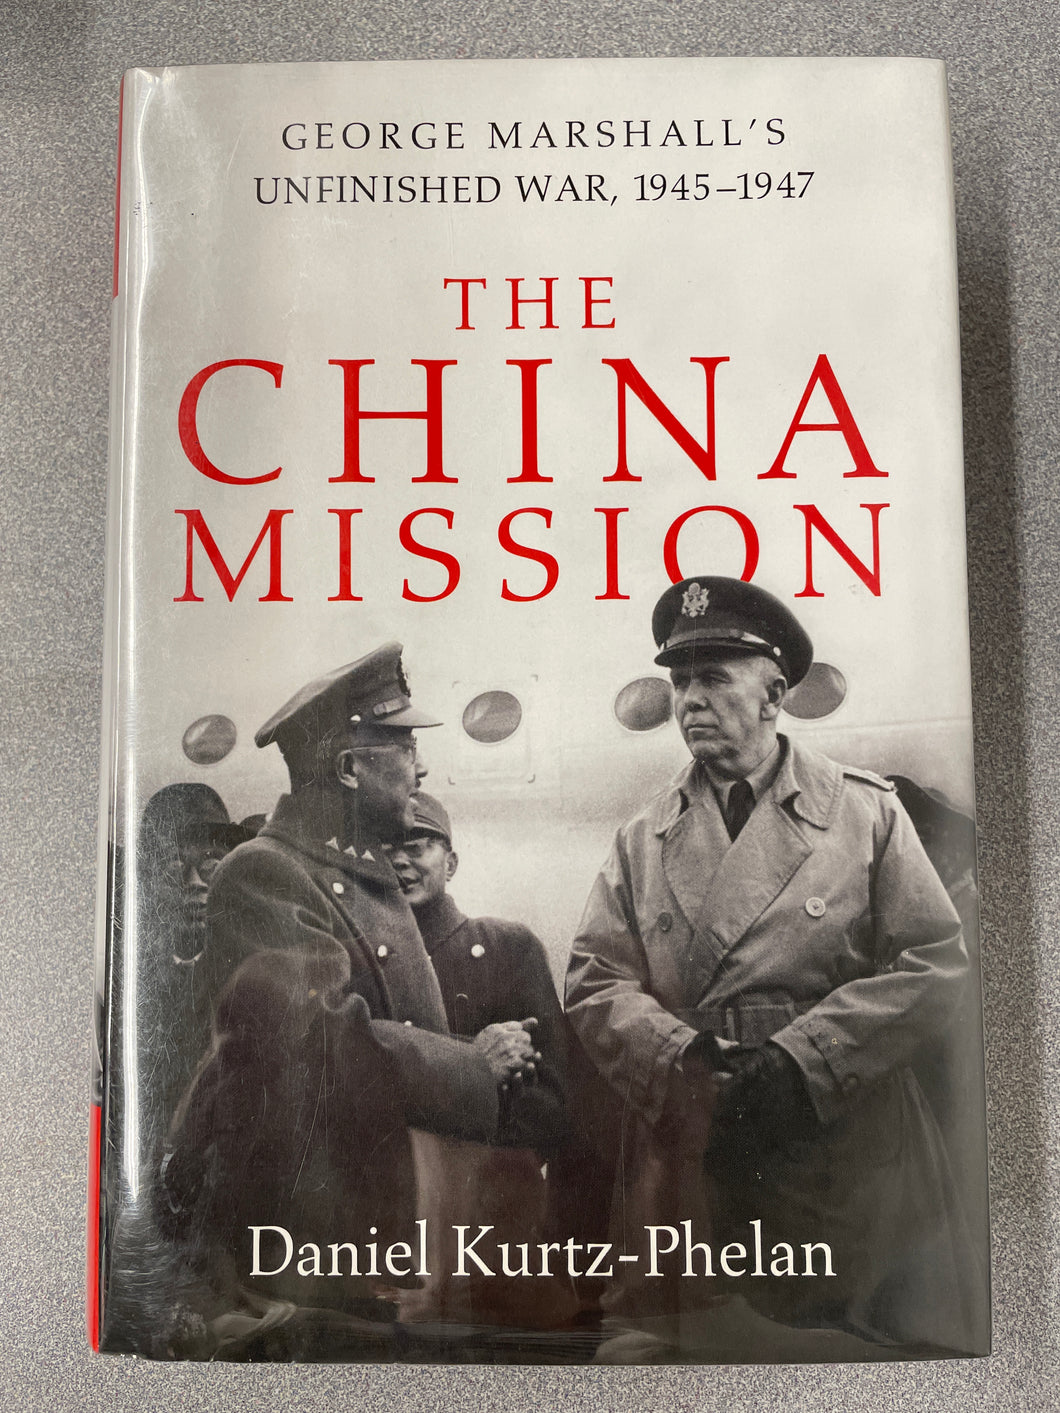 The China Mission: George Marshall's Unfinished War, 1945-1947 [2018] H 12/23